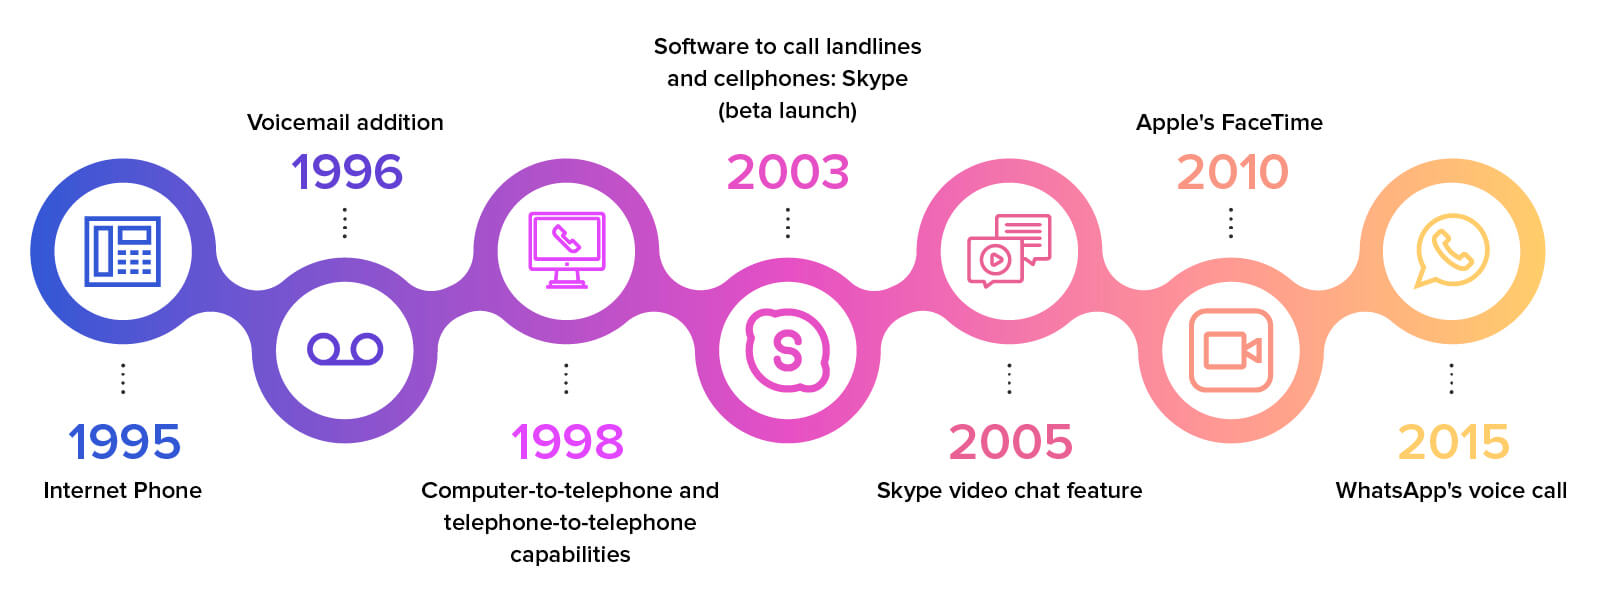 VoIP during remote work, and meeting its QoS challenges - Site24x7 Blog